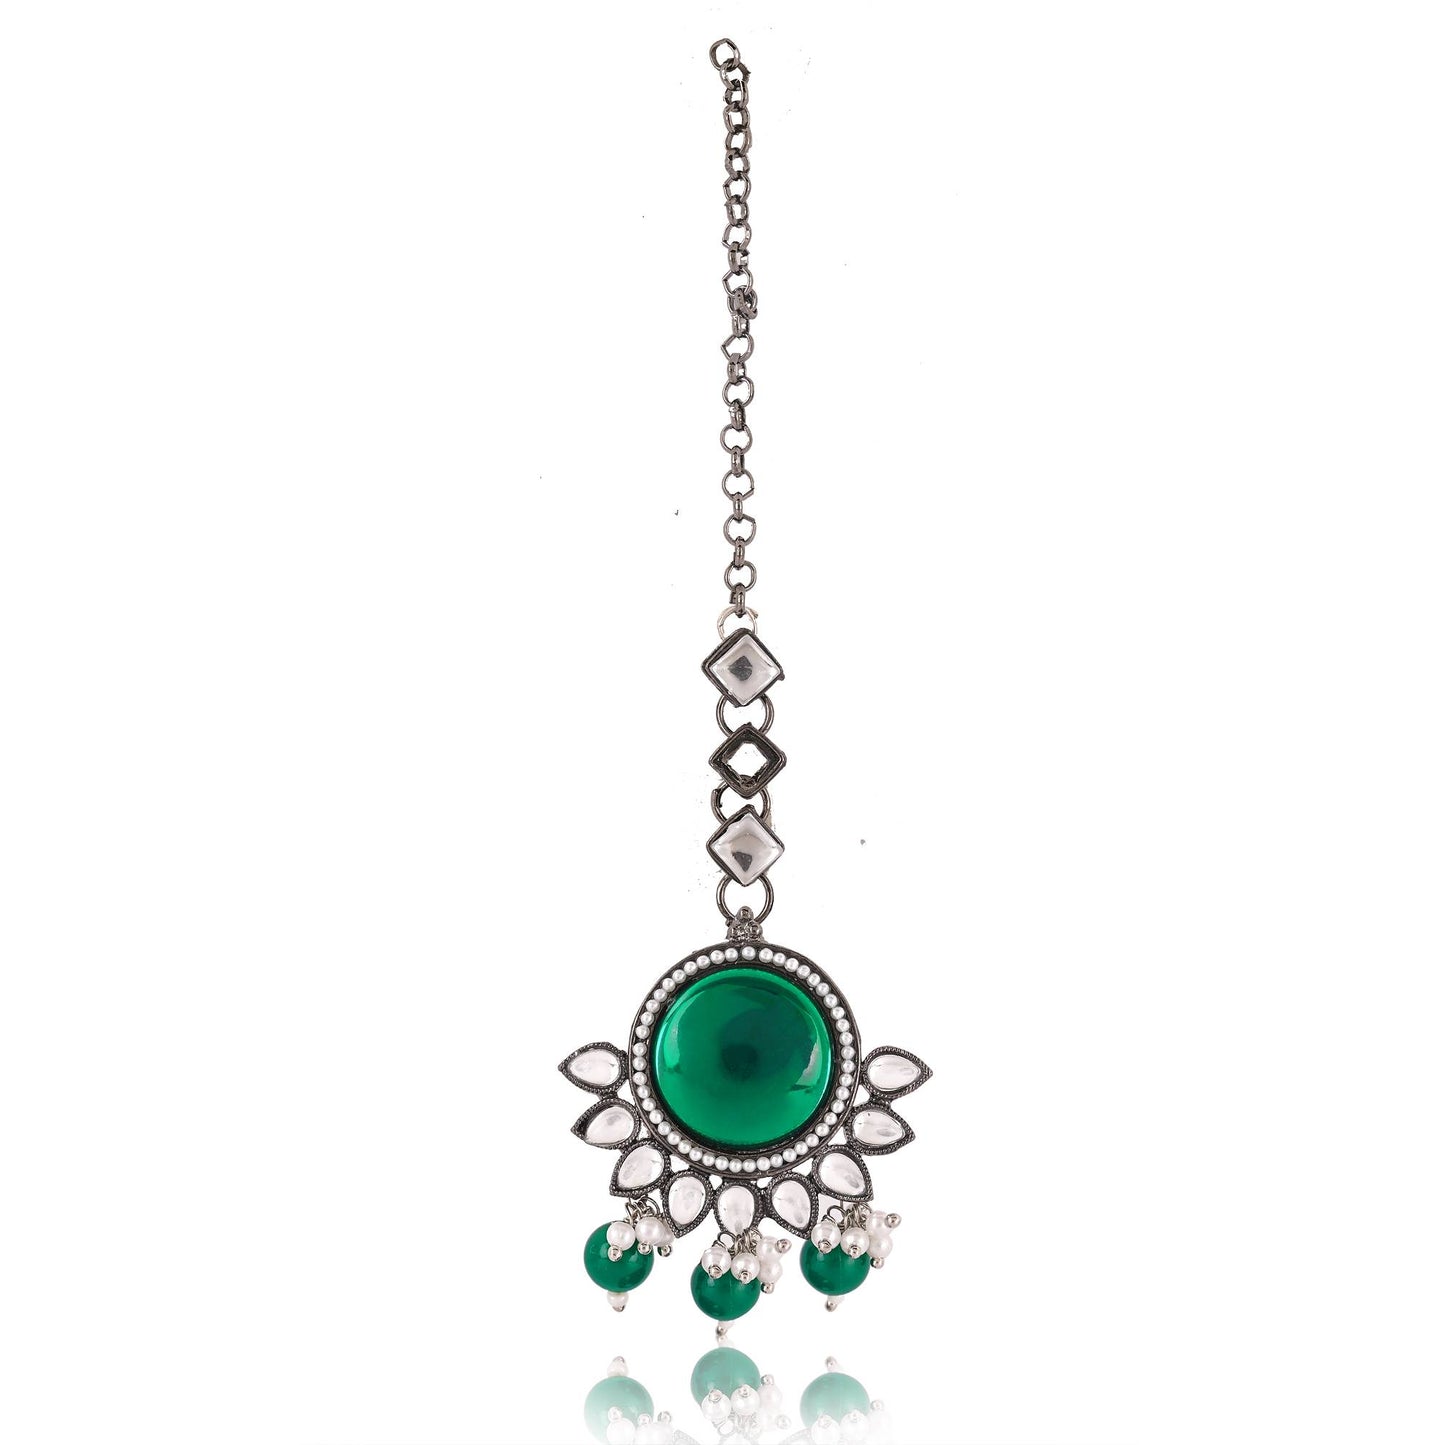 Silver Plated Long and Short Necklace with Green Gem Stones